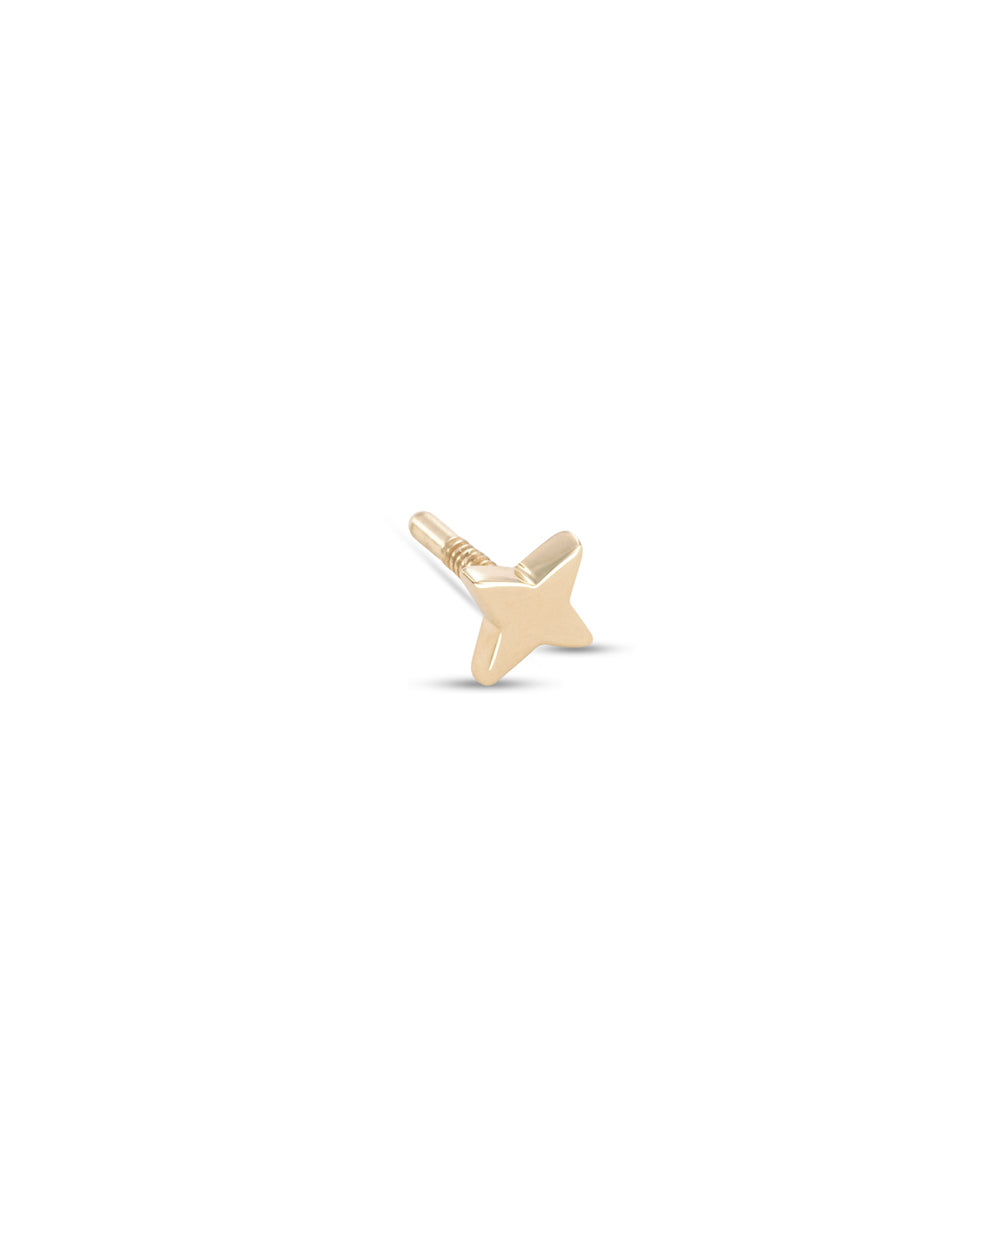 Covetear Starlight Cartilage Earring#material_14k_Yellow_Gold